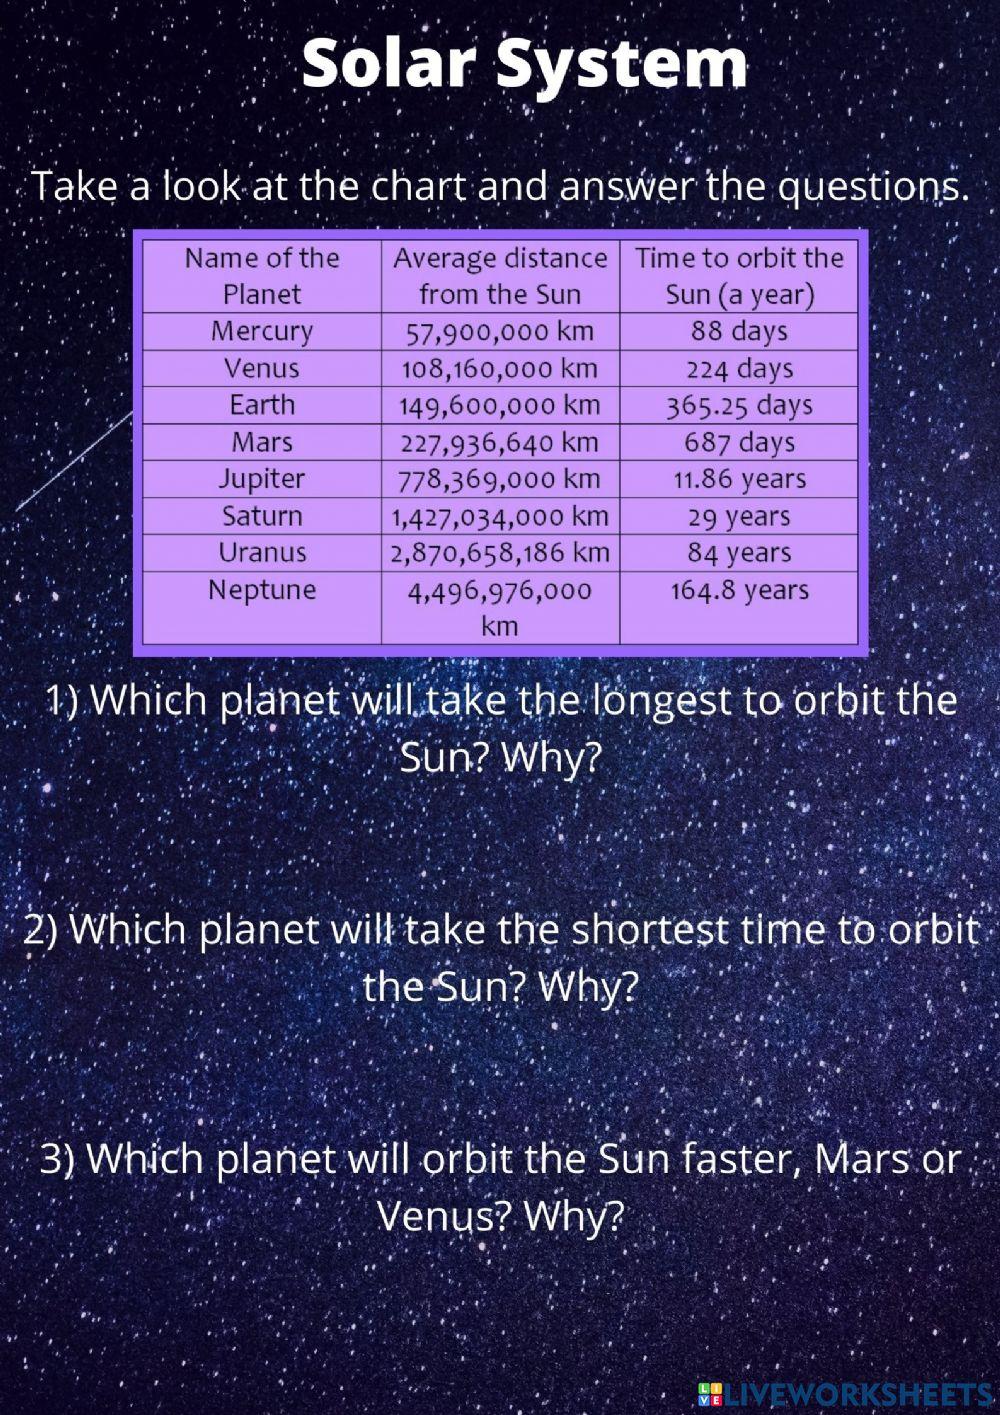 Planets distance from the Sun